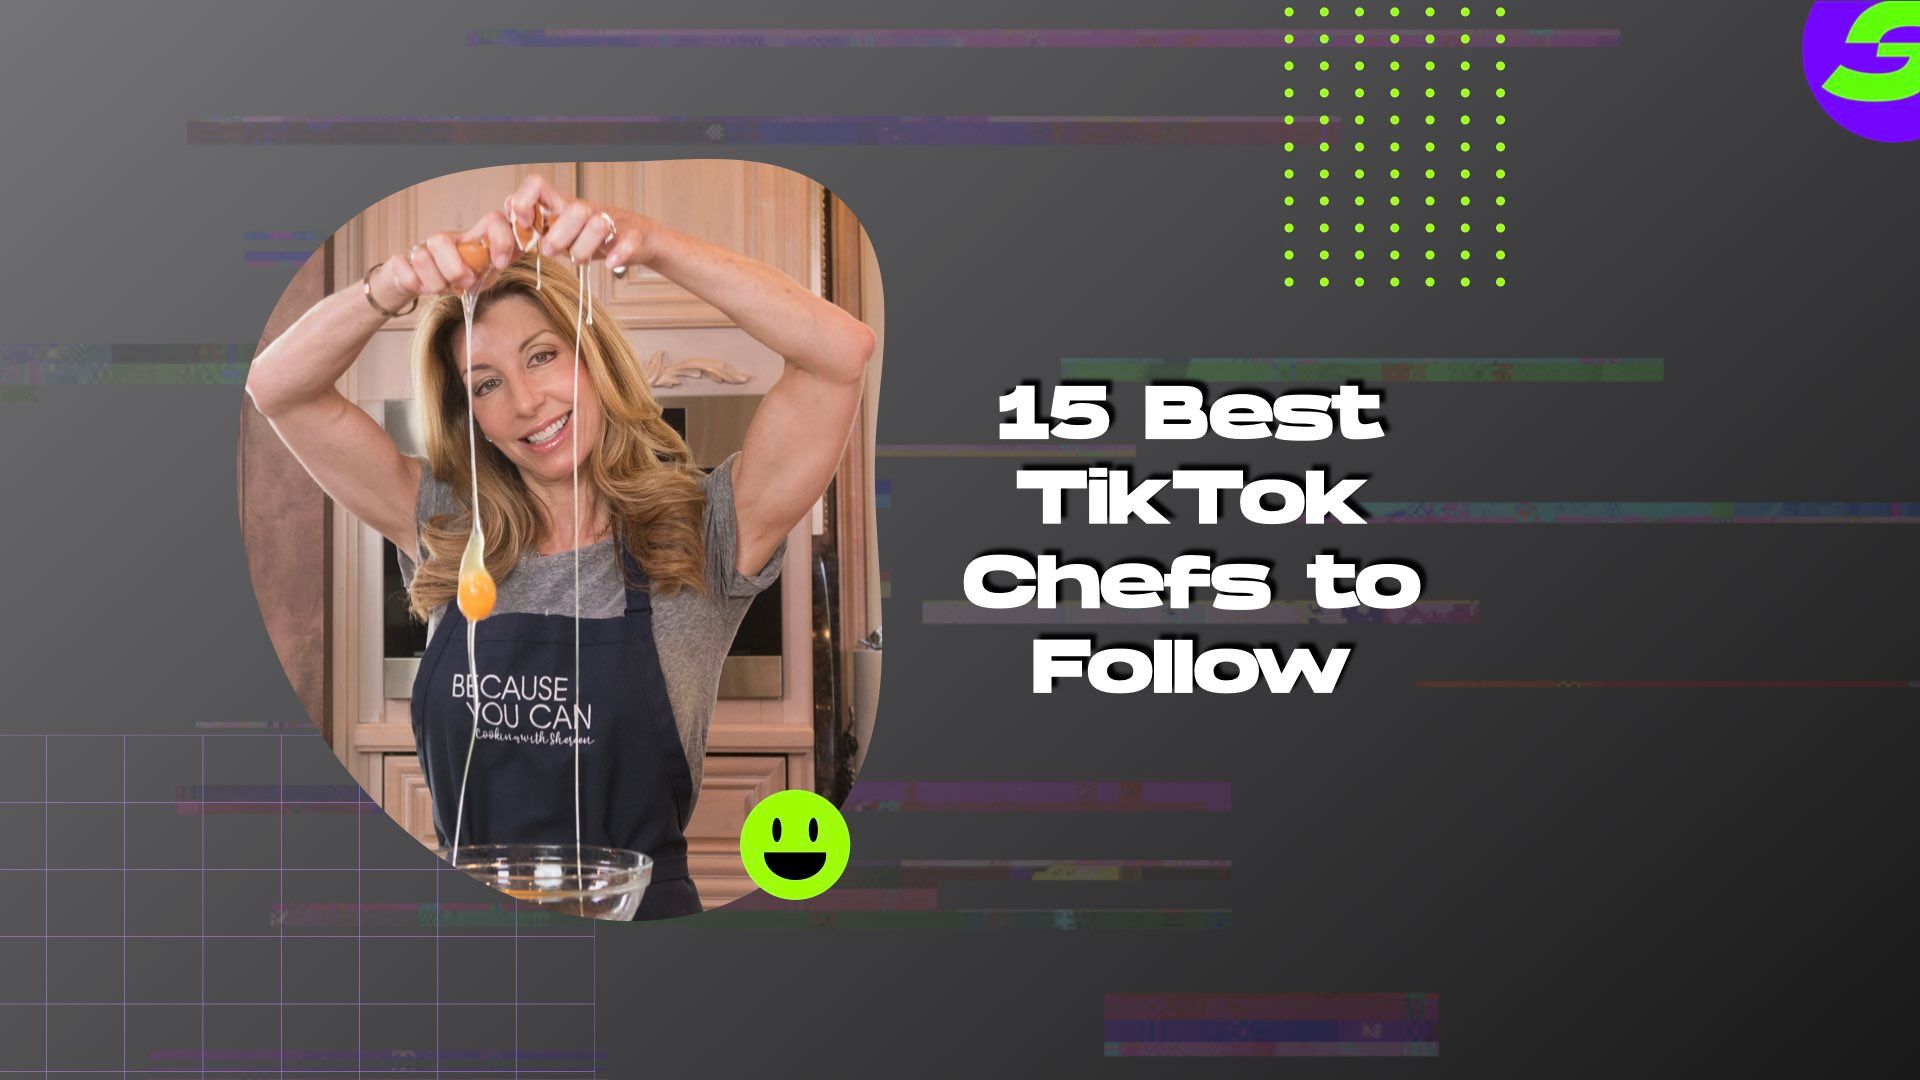 nick from master chef｜TikTok Search